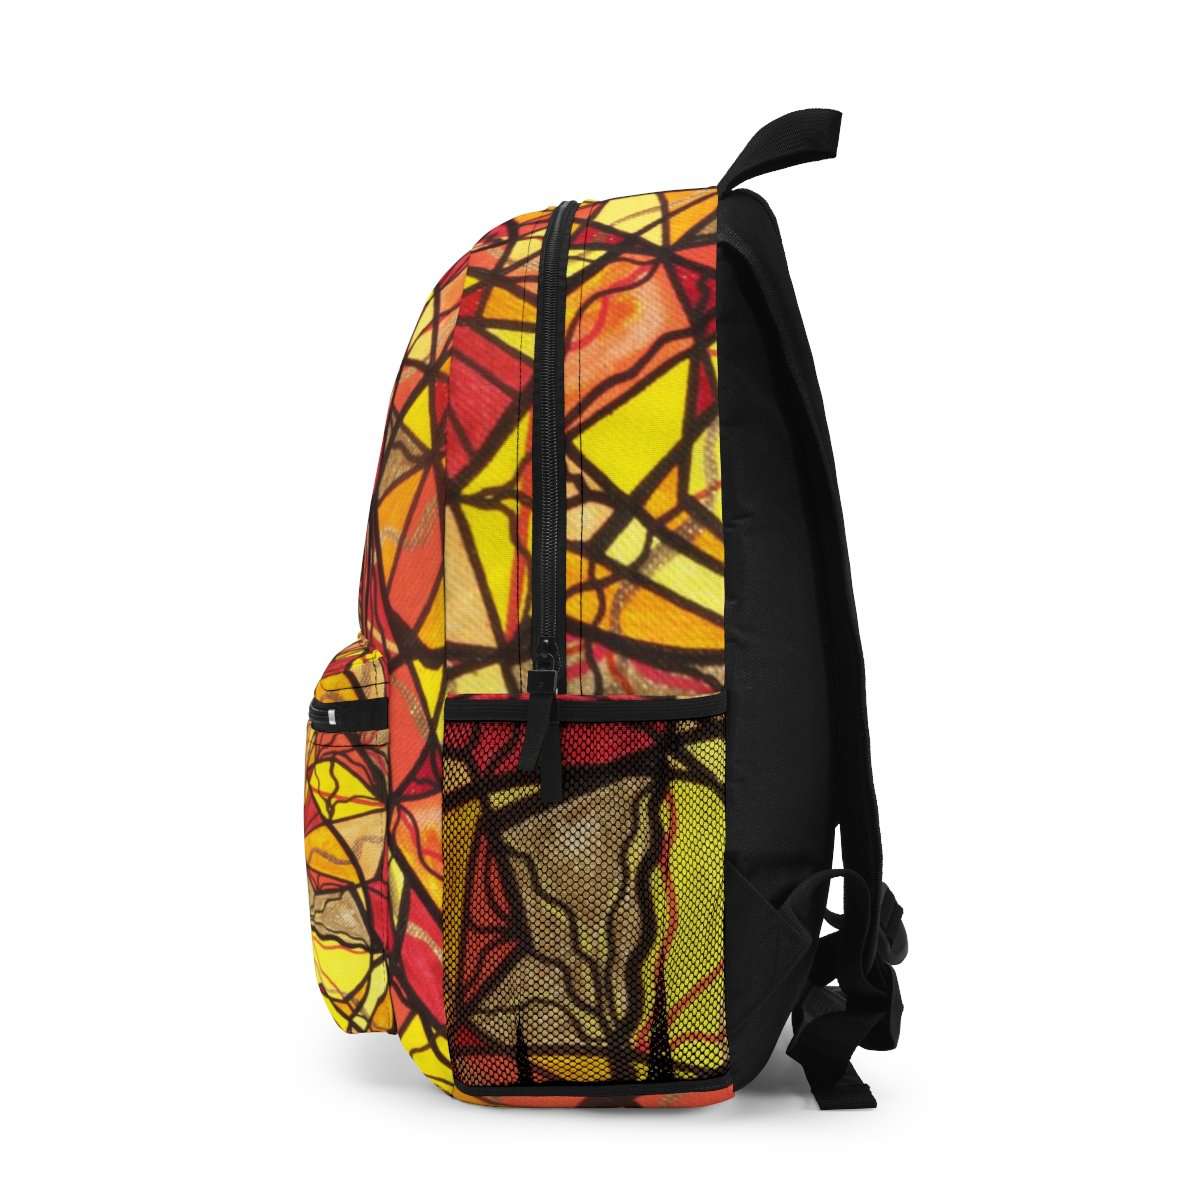 cheapest-empowerment-aop-backpack-hot-on-sale_1.jpg